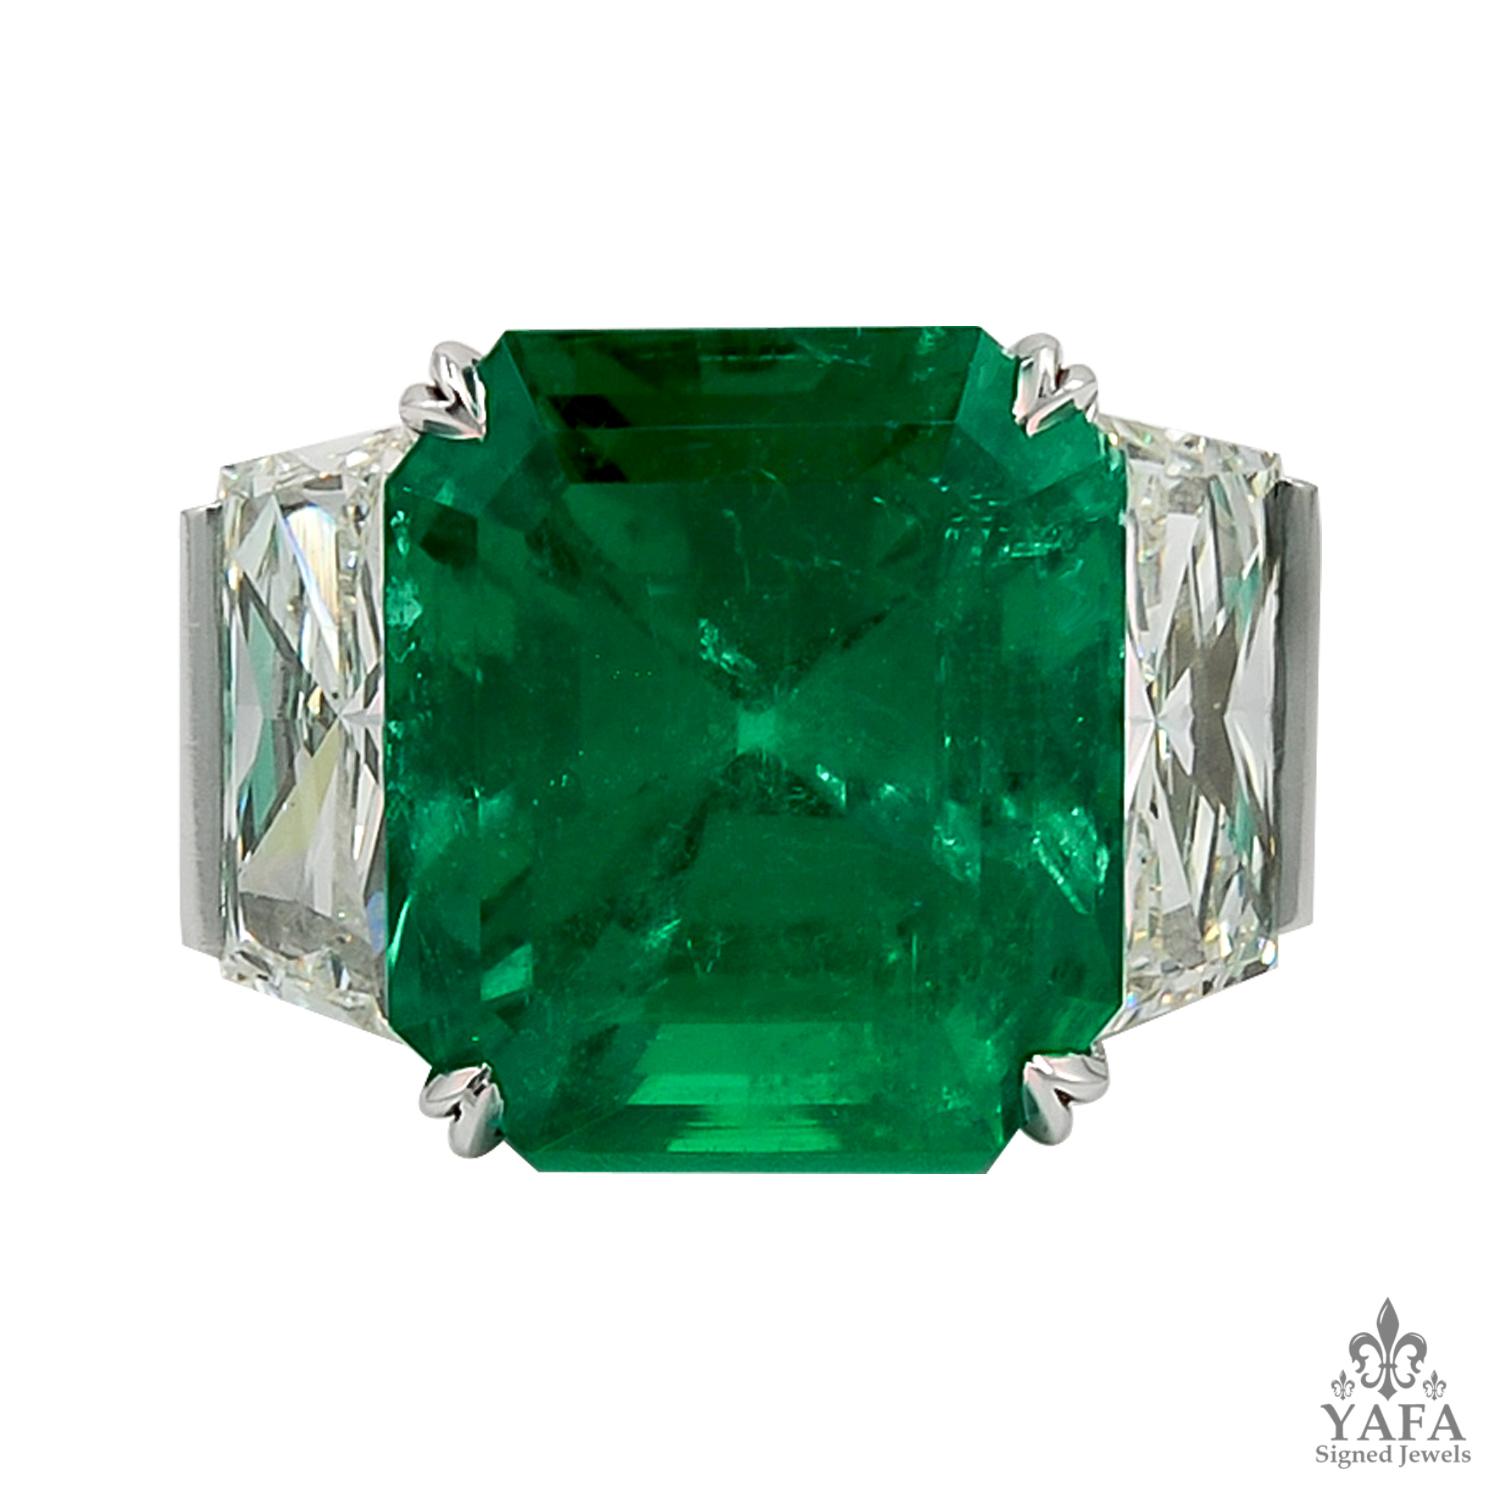 Very Fine Colombian 16.97 Carat Emerald With SSEF Certificate Diamond Ring
Colombian emerald approx. – 16.97 cts. with SSEF certificate
total diamond carat weight approx. 5.32 cts.
ring size 6.5
